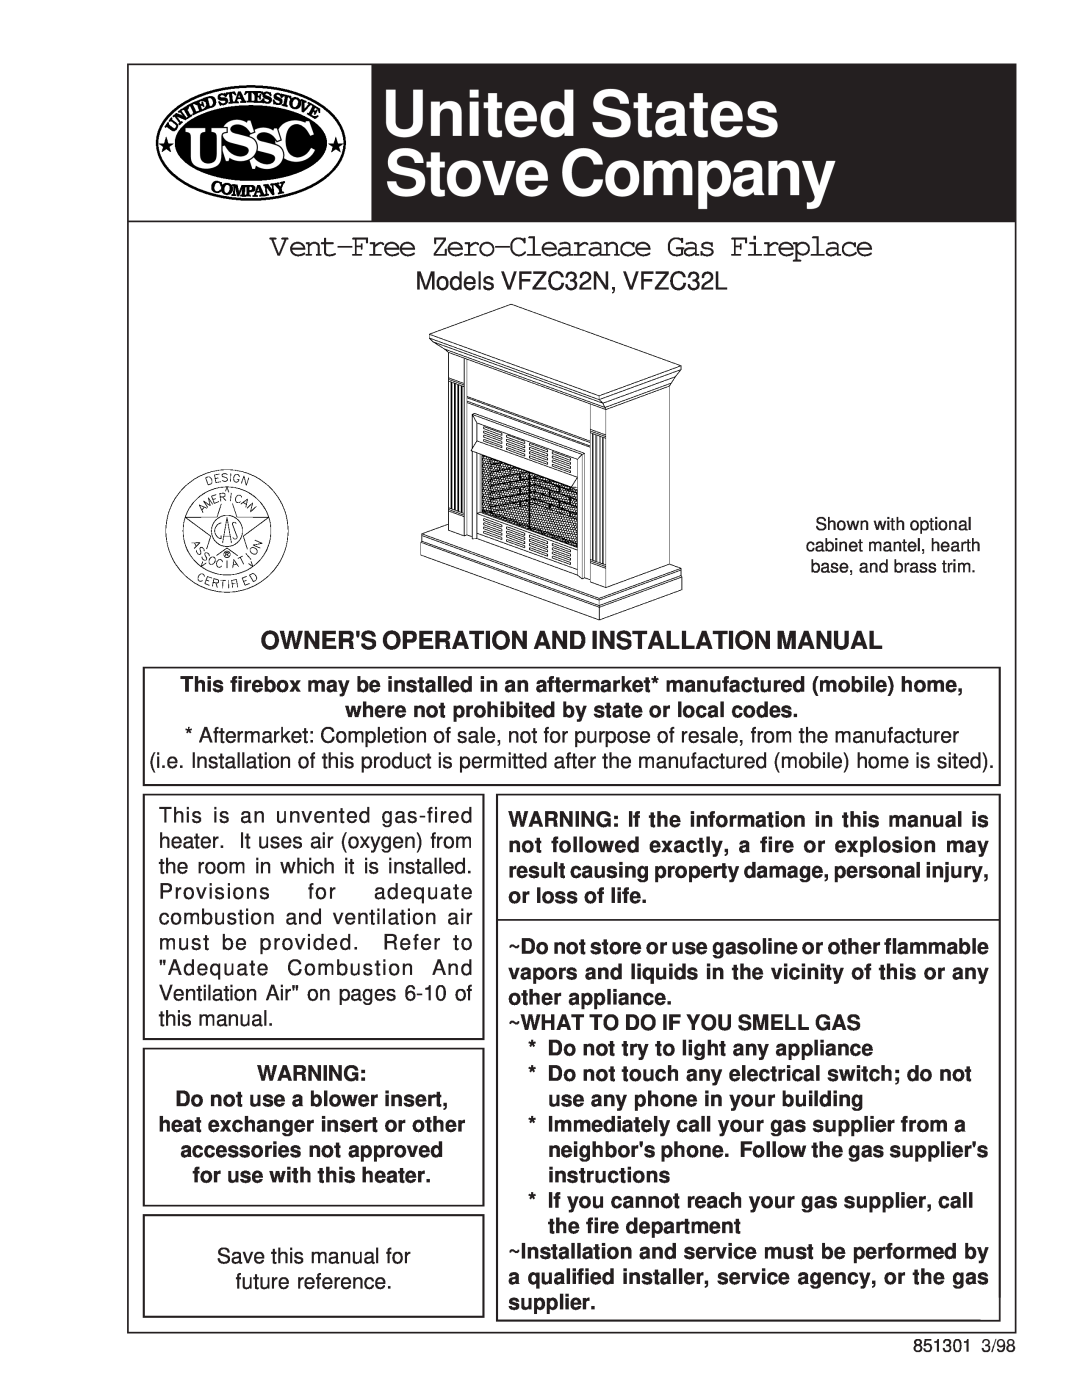 United States Stove installation manual Models VFZC32N, VFZC32L, Owners Operation And Installation Manual, Ussc, Ompan 